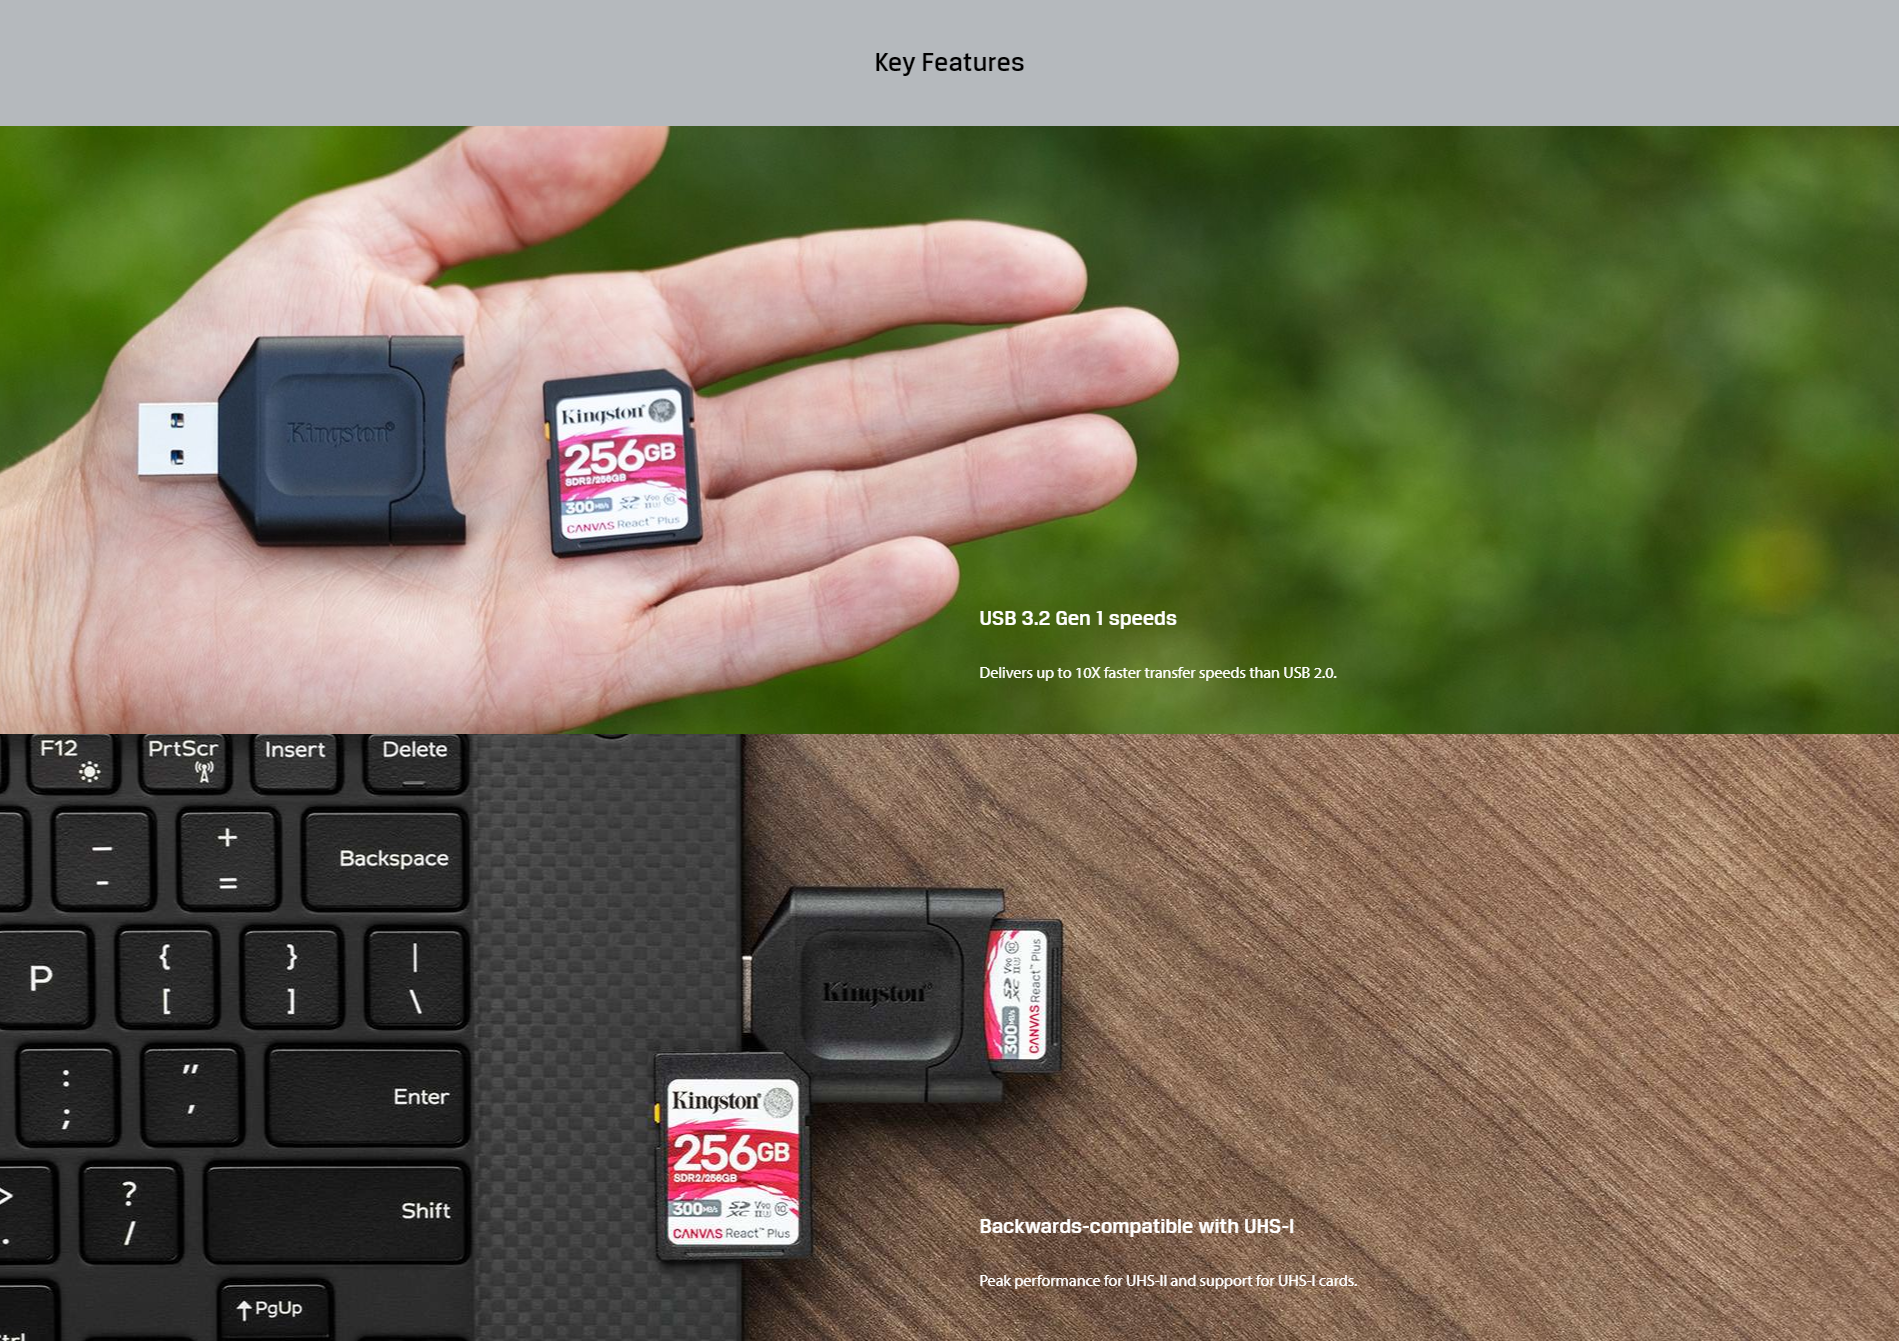 A large marketing image providing additional information about the product Kingston MobileLite Plus SD Card Reader - Additional alt info not provided